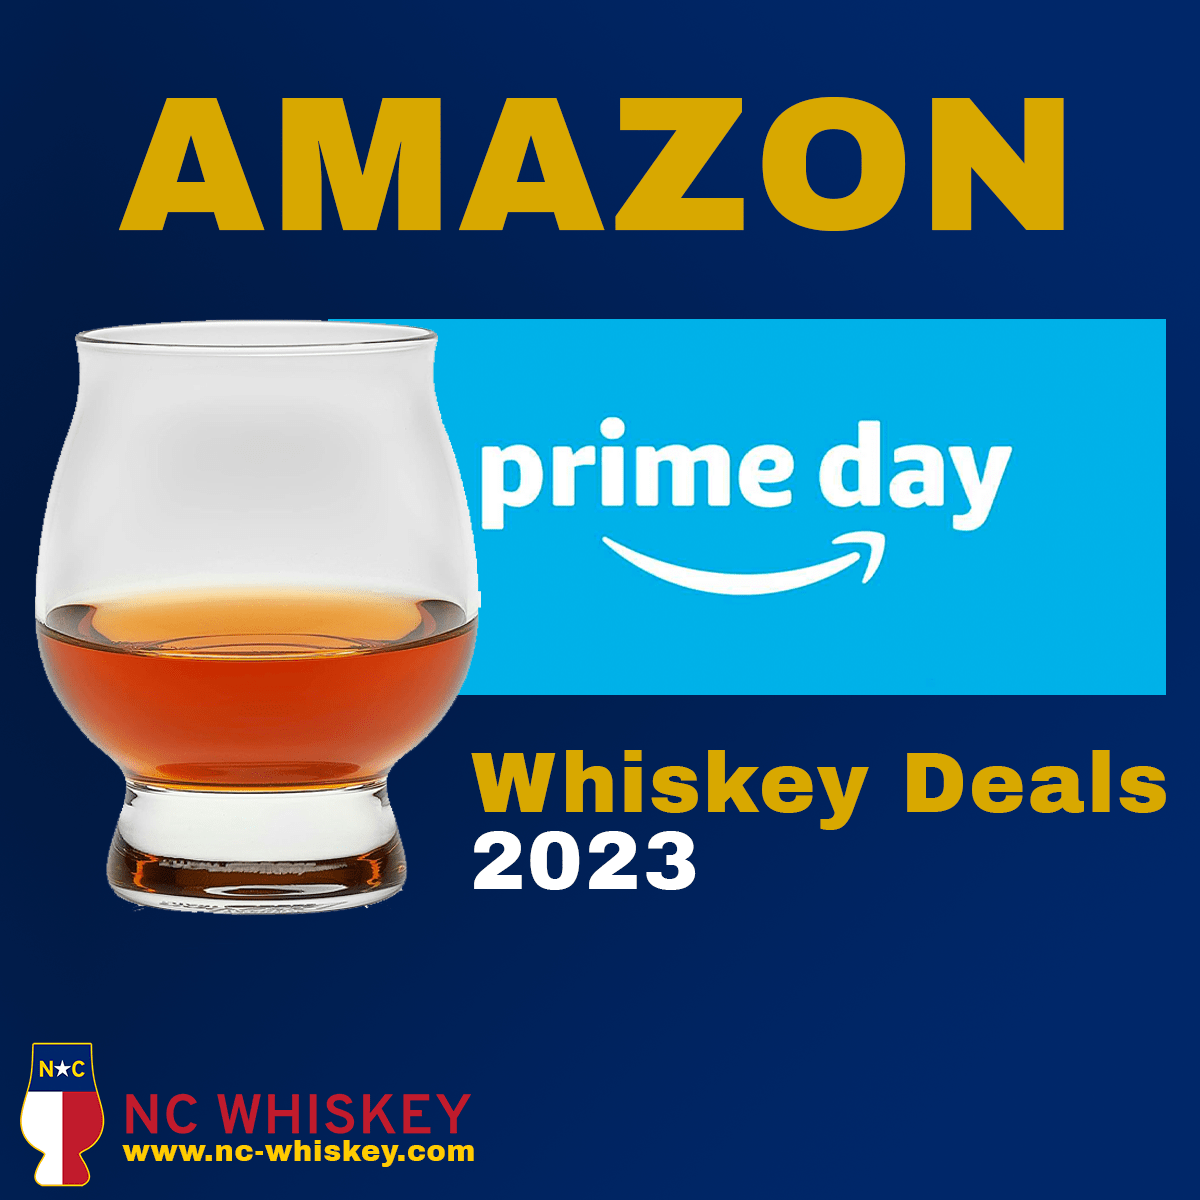 https://www.nc-whiskey.com/wp-content/uploads/2023/07/primeday.png